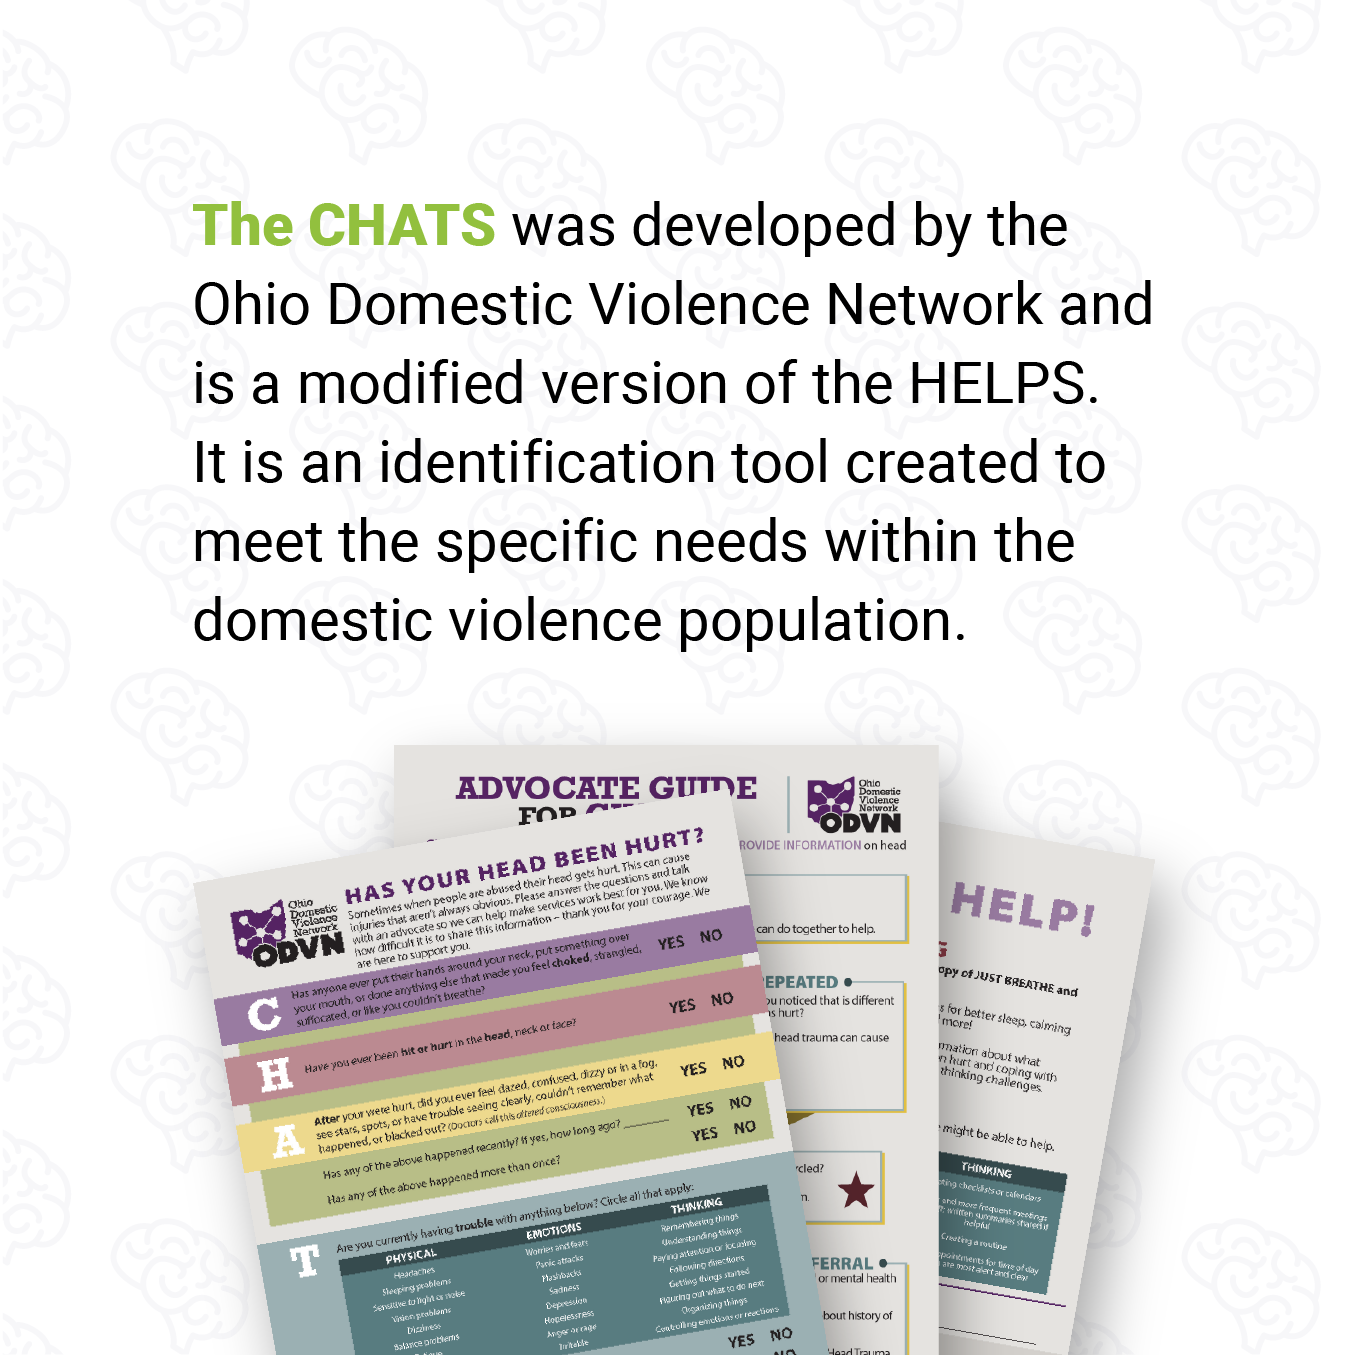 The CHATS was developed by the Ohio Domestic Violence Network and is a modified version of the HELPS. It is an identification tool created to meet the specific needs within the domestic violence population. 